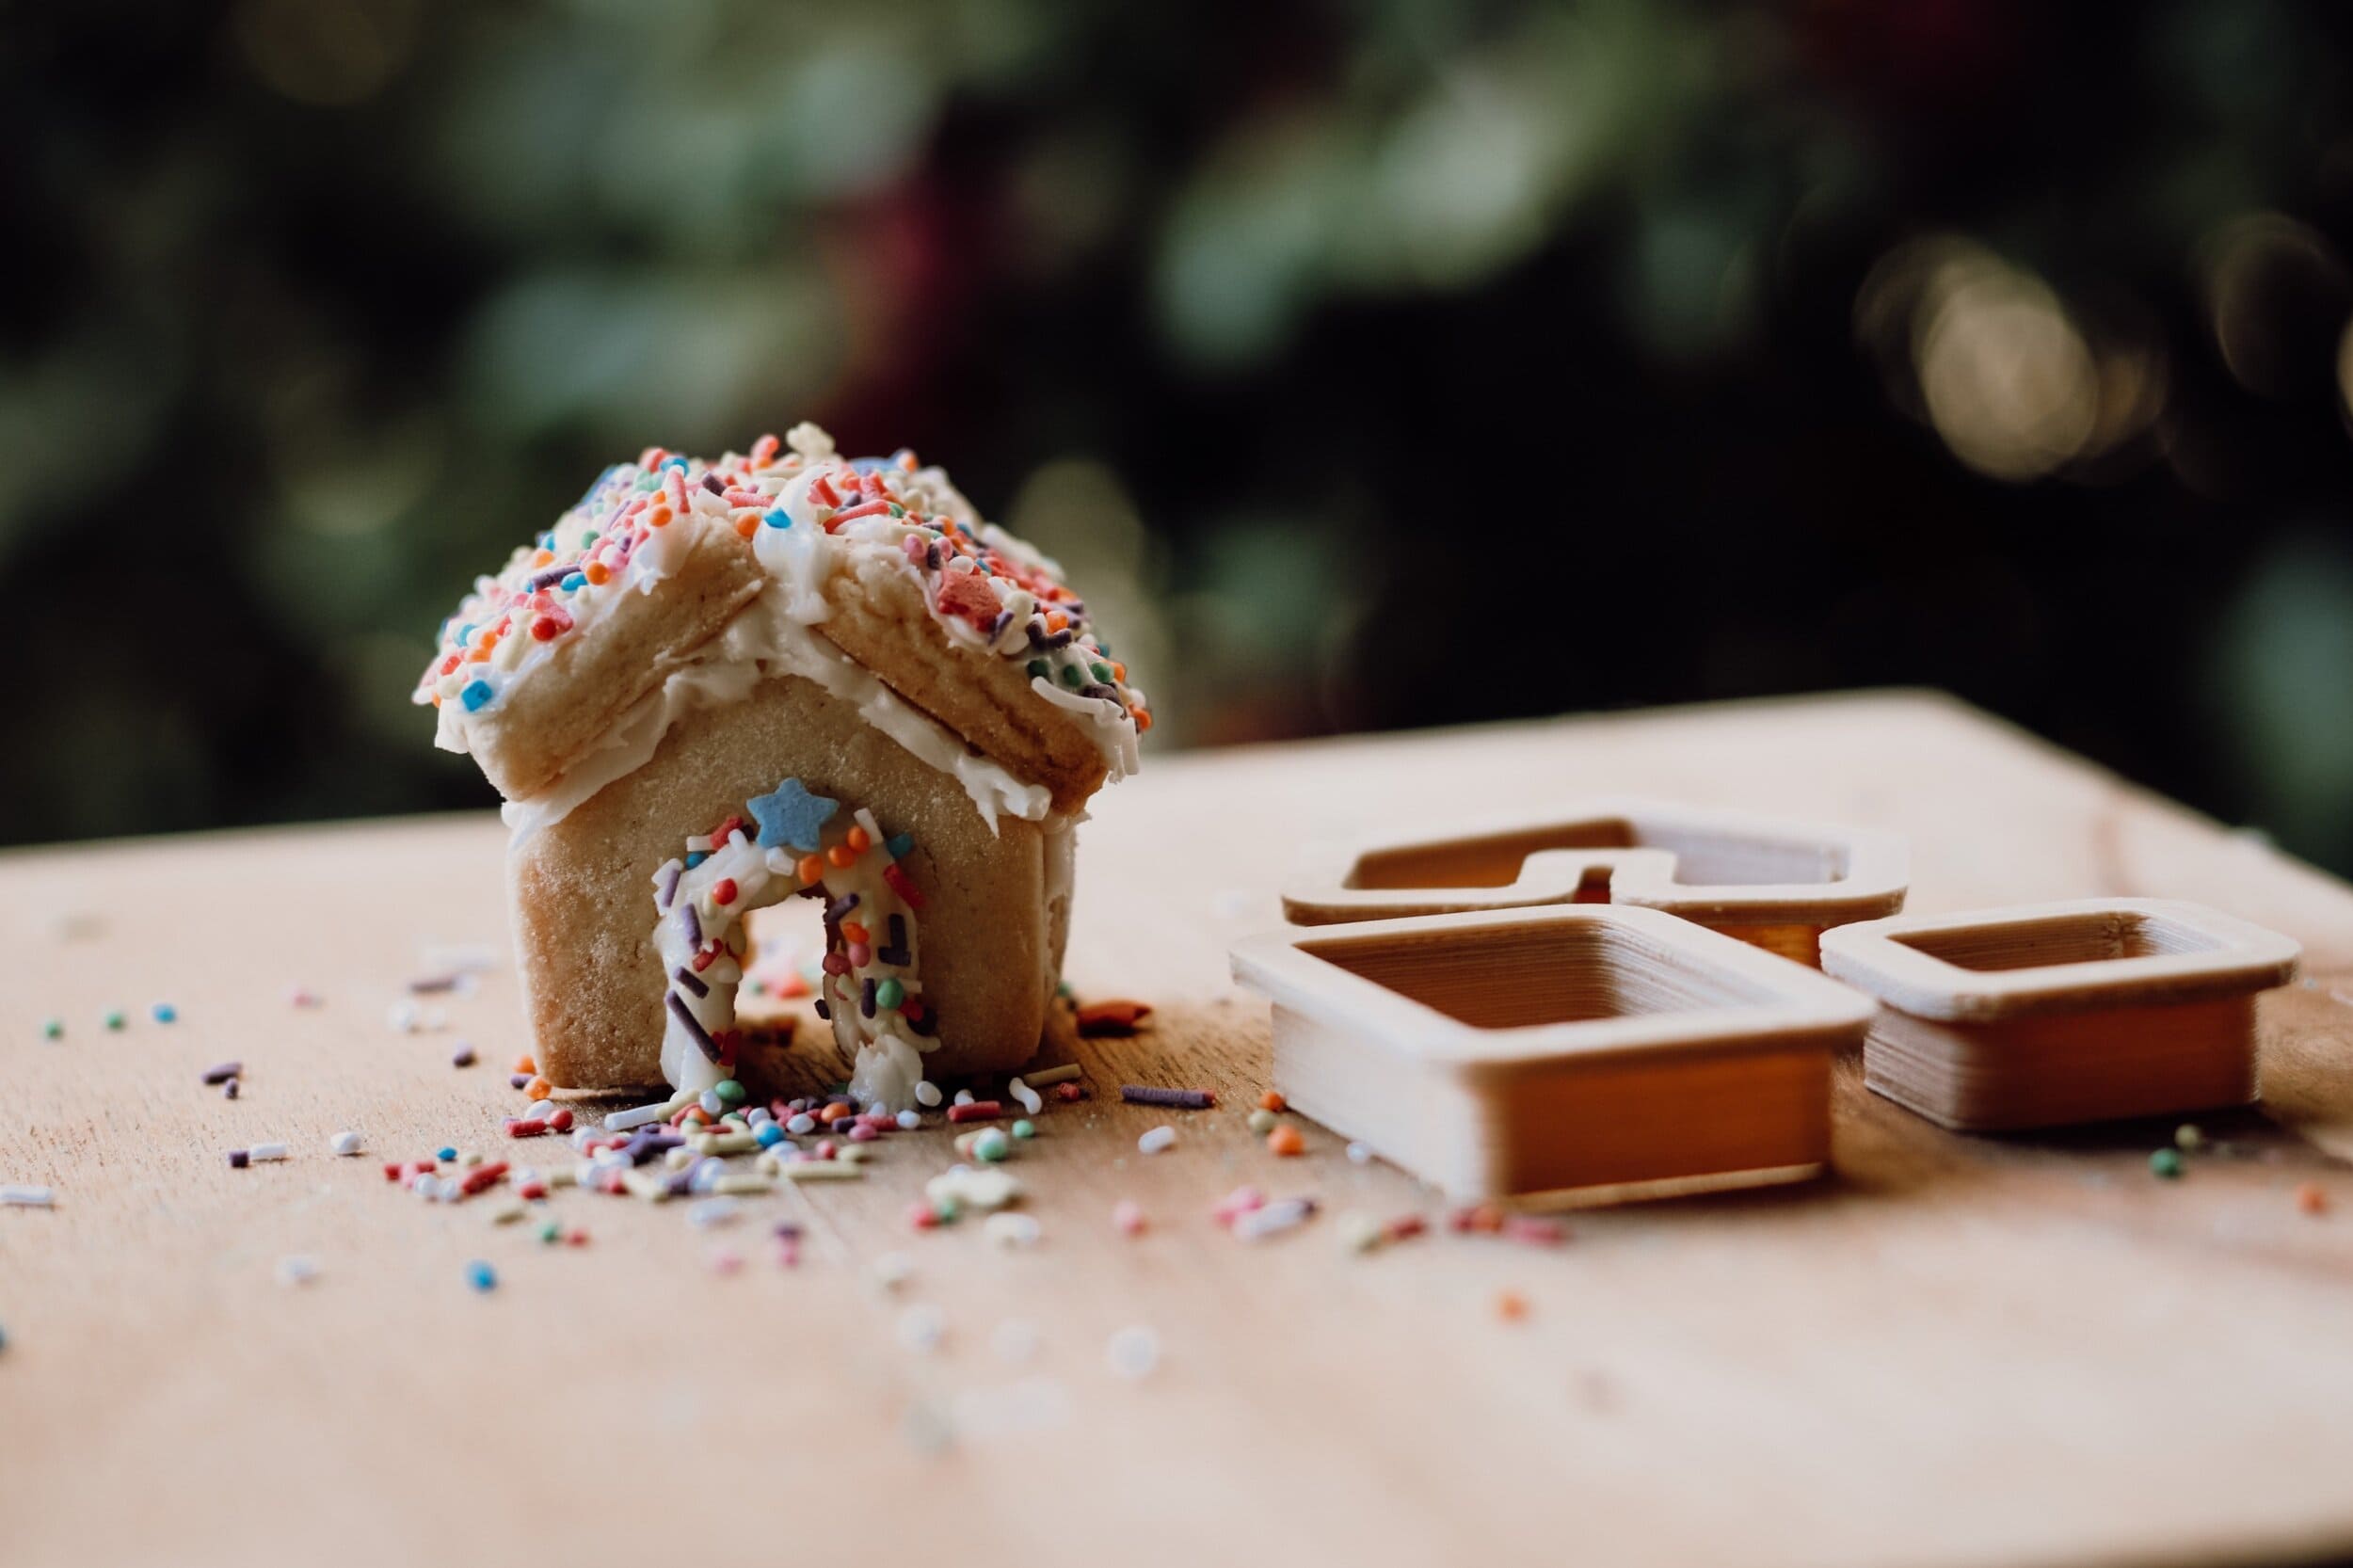 Gingerbread House Eco Cutter Set